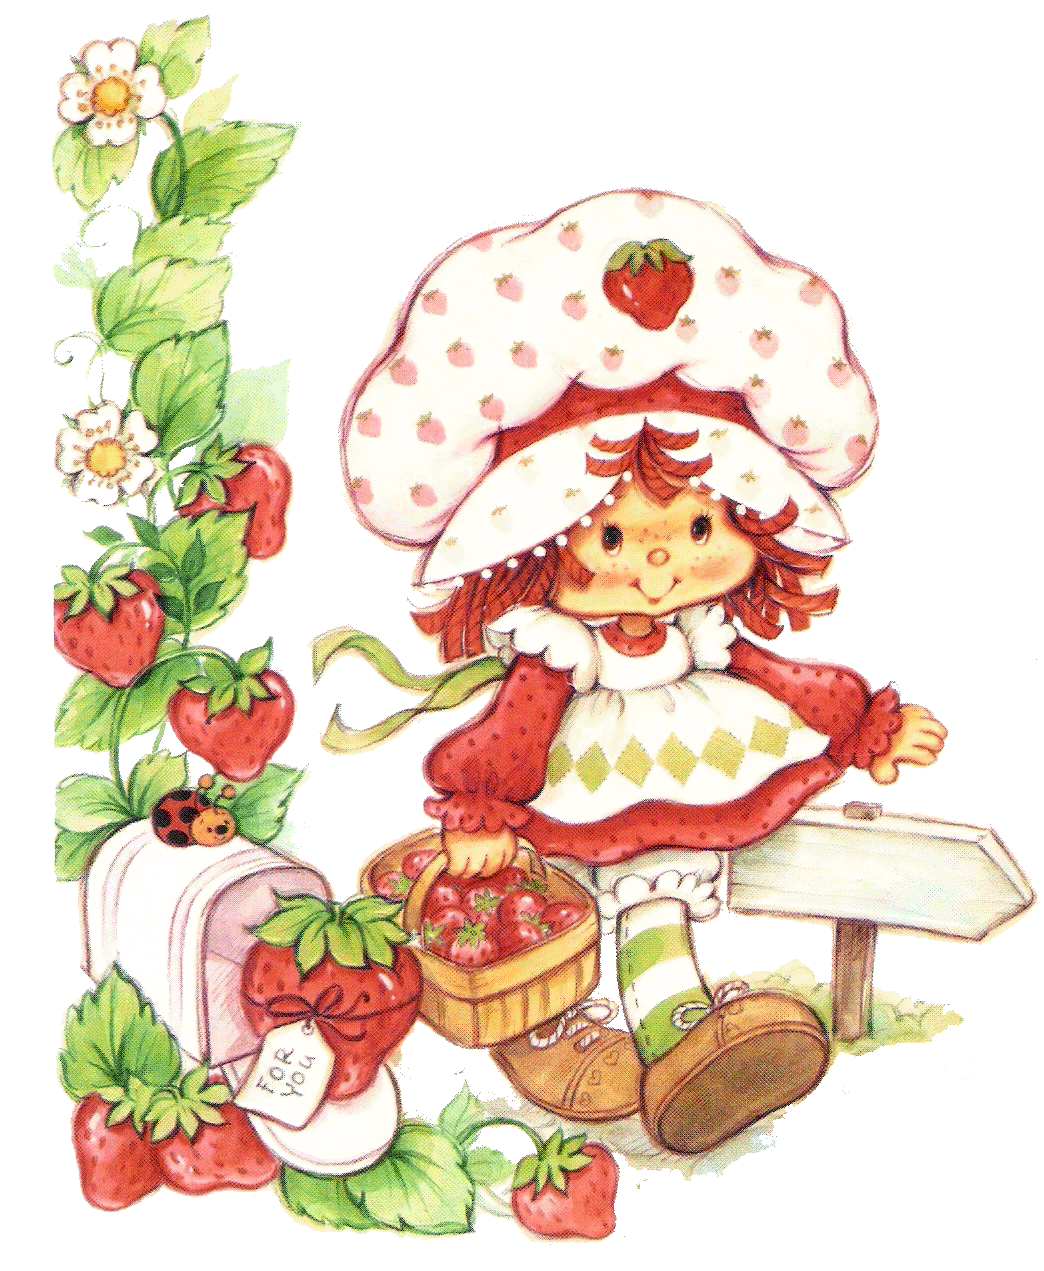 New retro vintage strawberry. Record clipart throwback